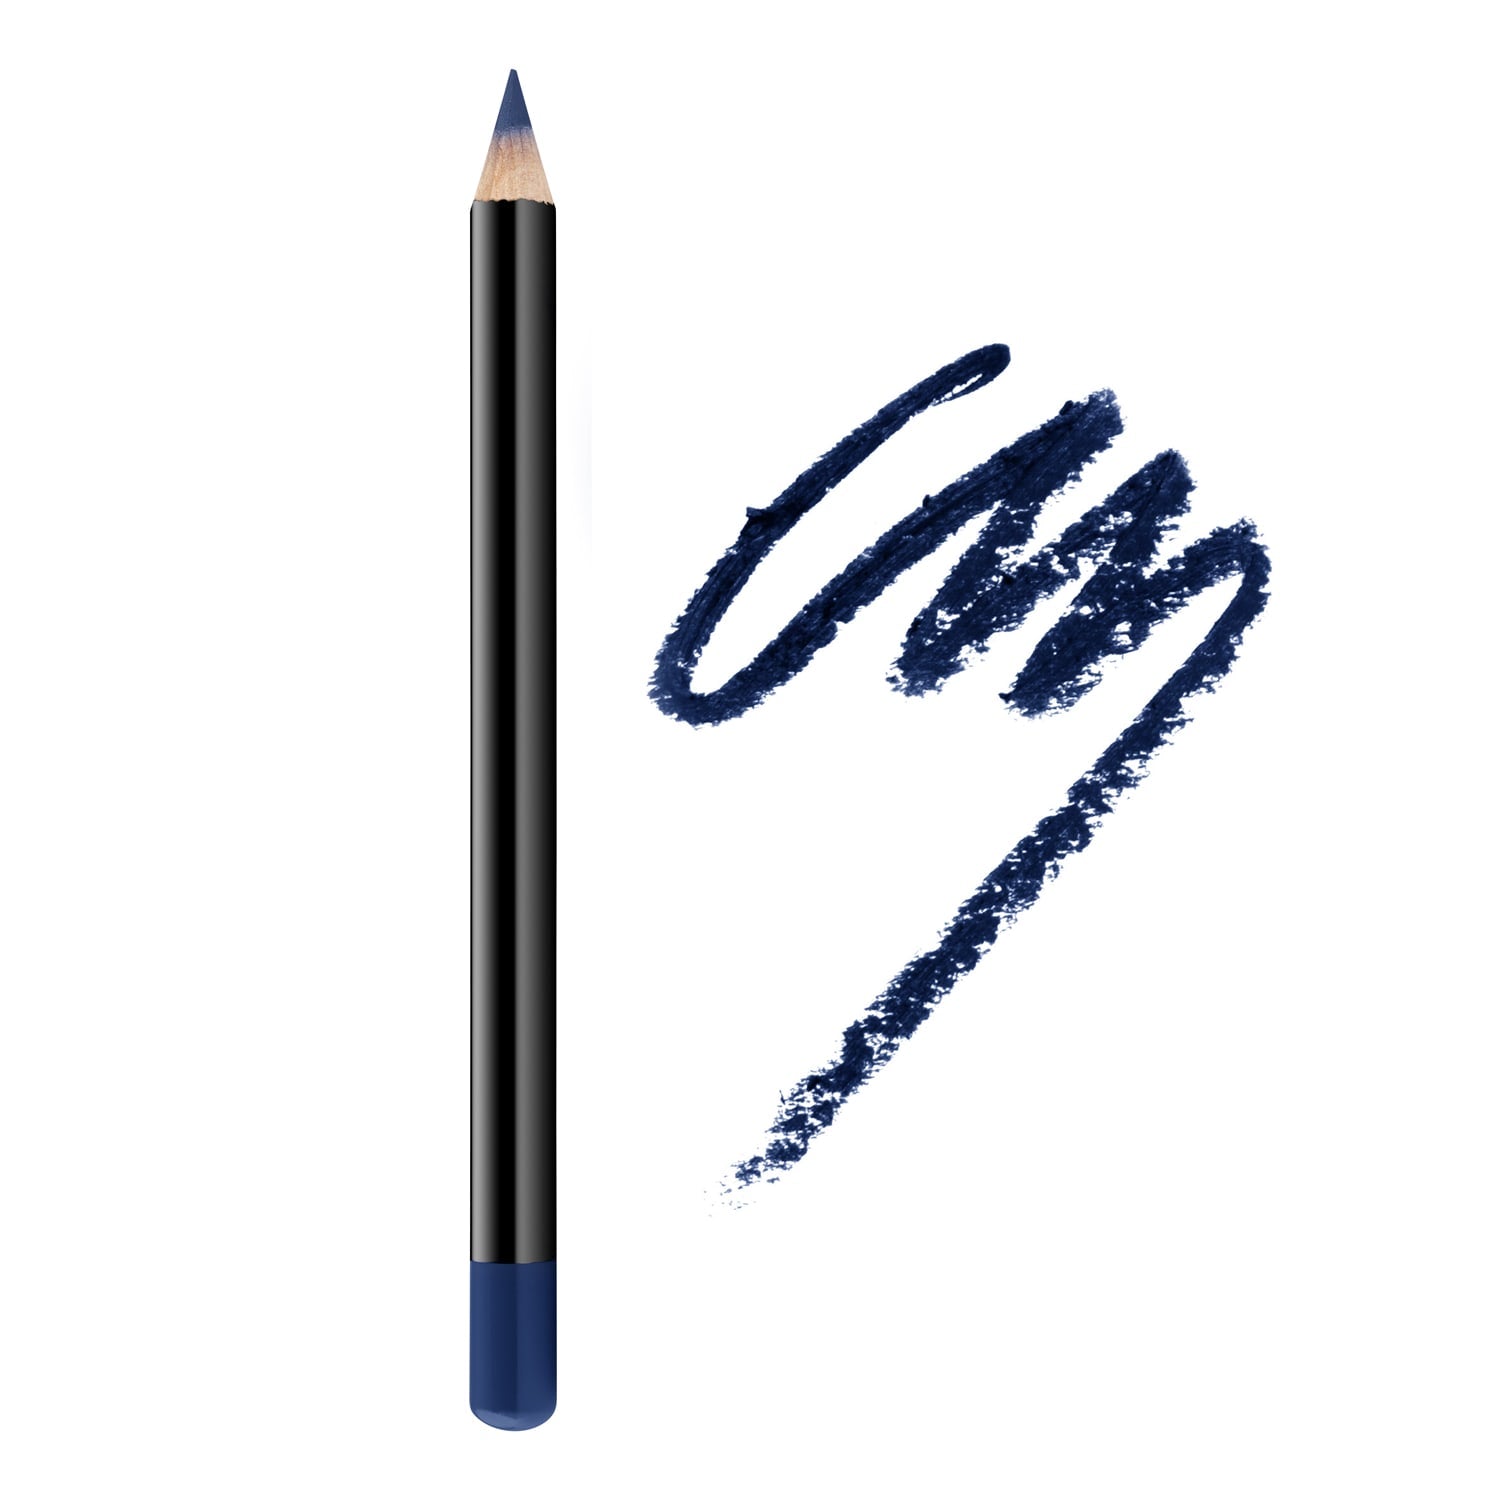 Eyeliner Pencil - M&H FashionEyeliner Pencileye-pencilM&H FashionM&H FashionEye-Pencil-8Blue Eye Pencil (08)Eyeliner PencilM&H Fashioneye-pencilM&H Fashion These cushiony, creamy eyeliner pencil deliver powerful, vibrant color that slides on smoothly. The soft texture glides on effortlessly because of the high-quality Eyeliner Pencil